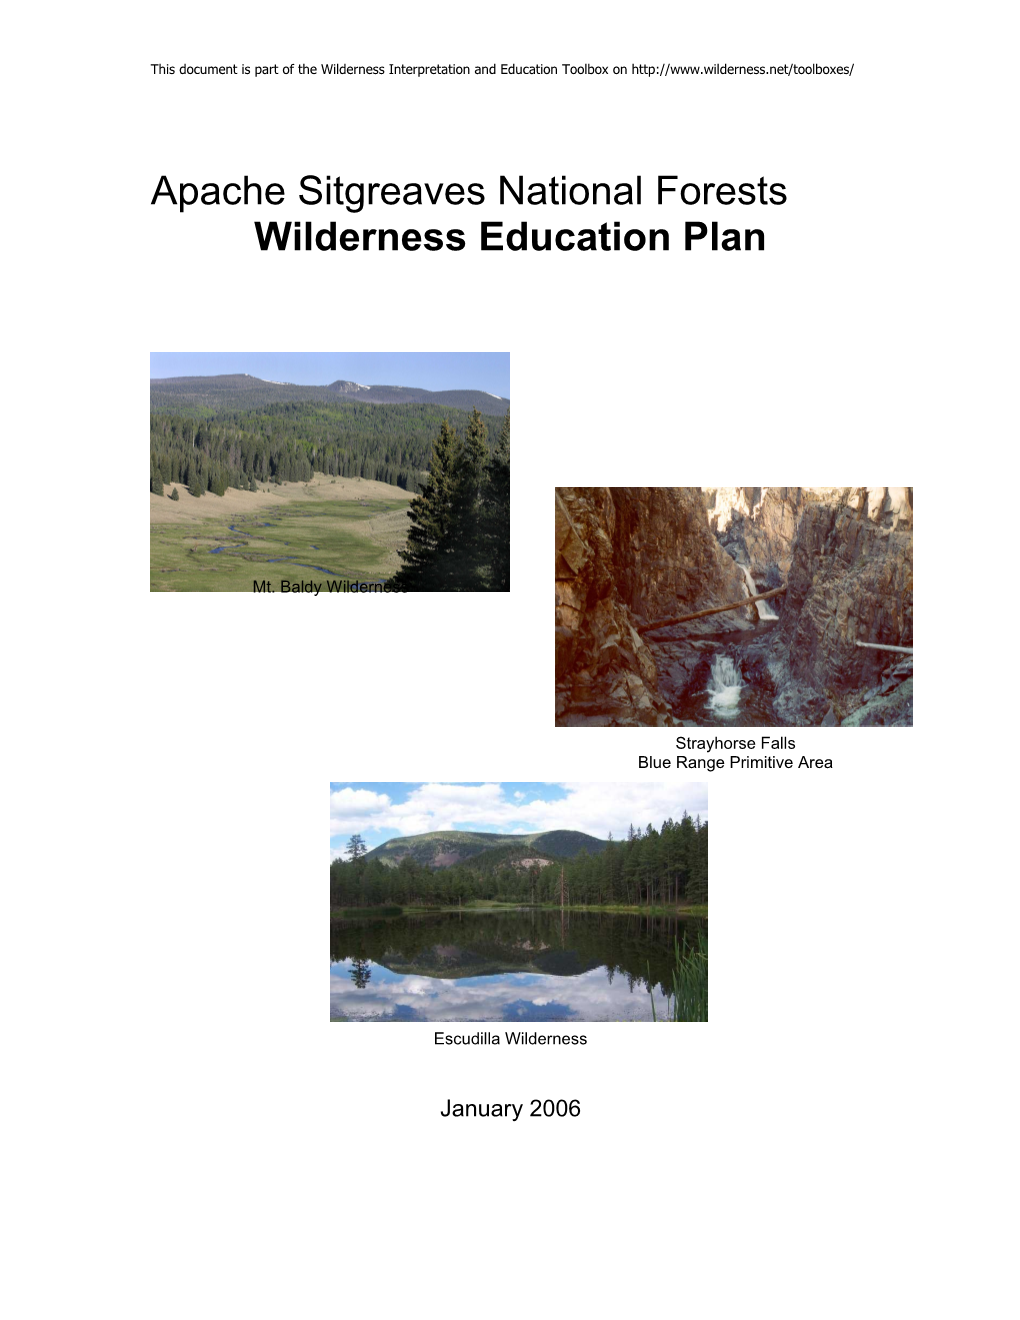 Apache Sitgreaves National Forests Wilderness Education Plan